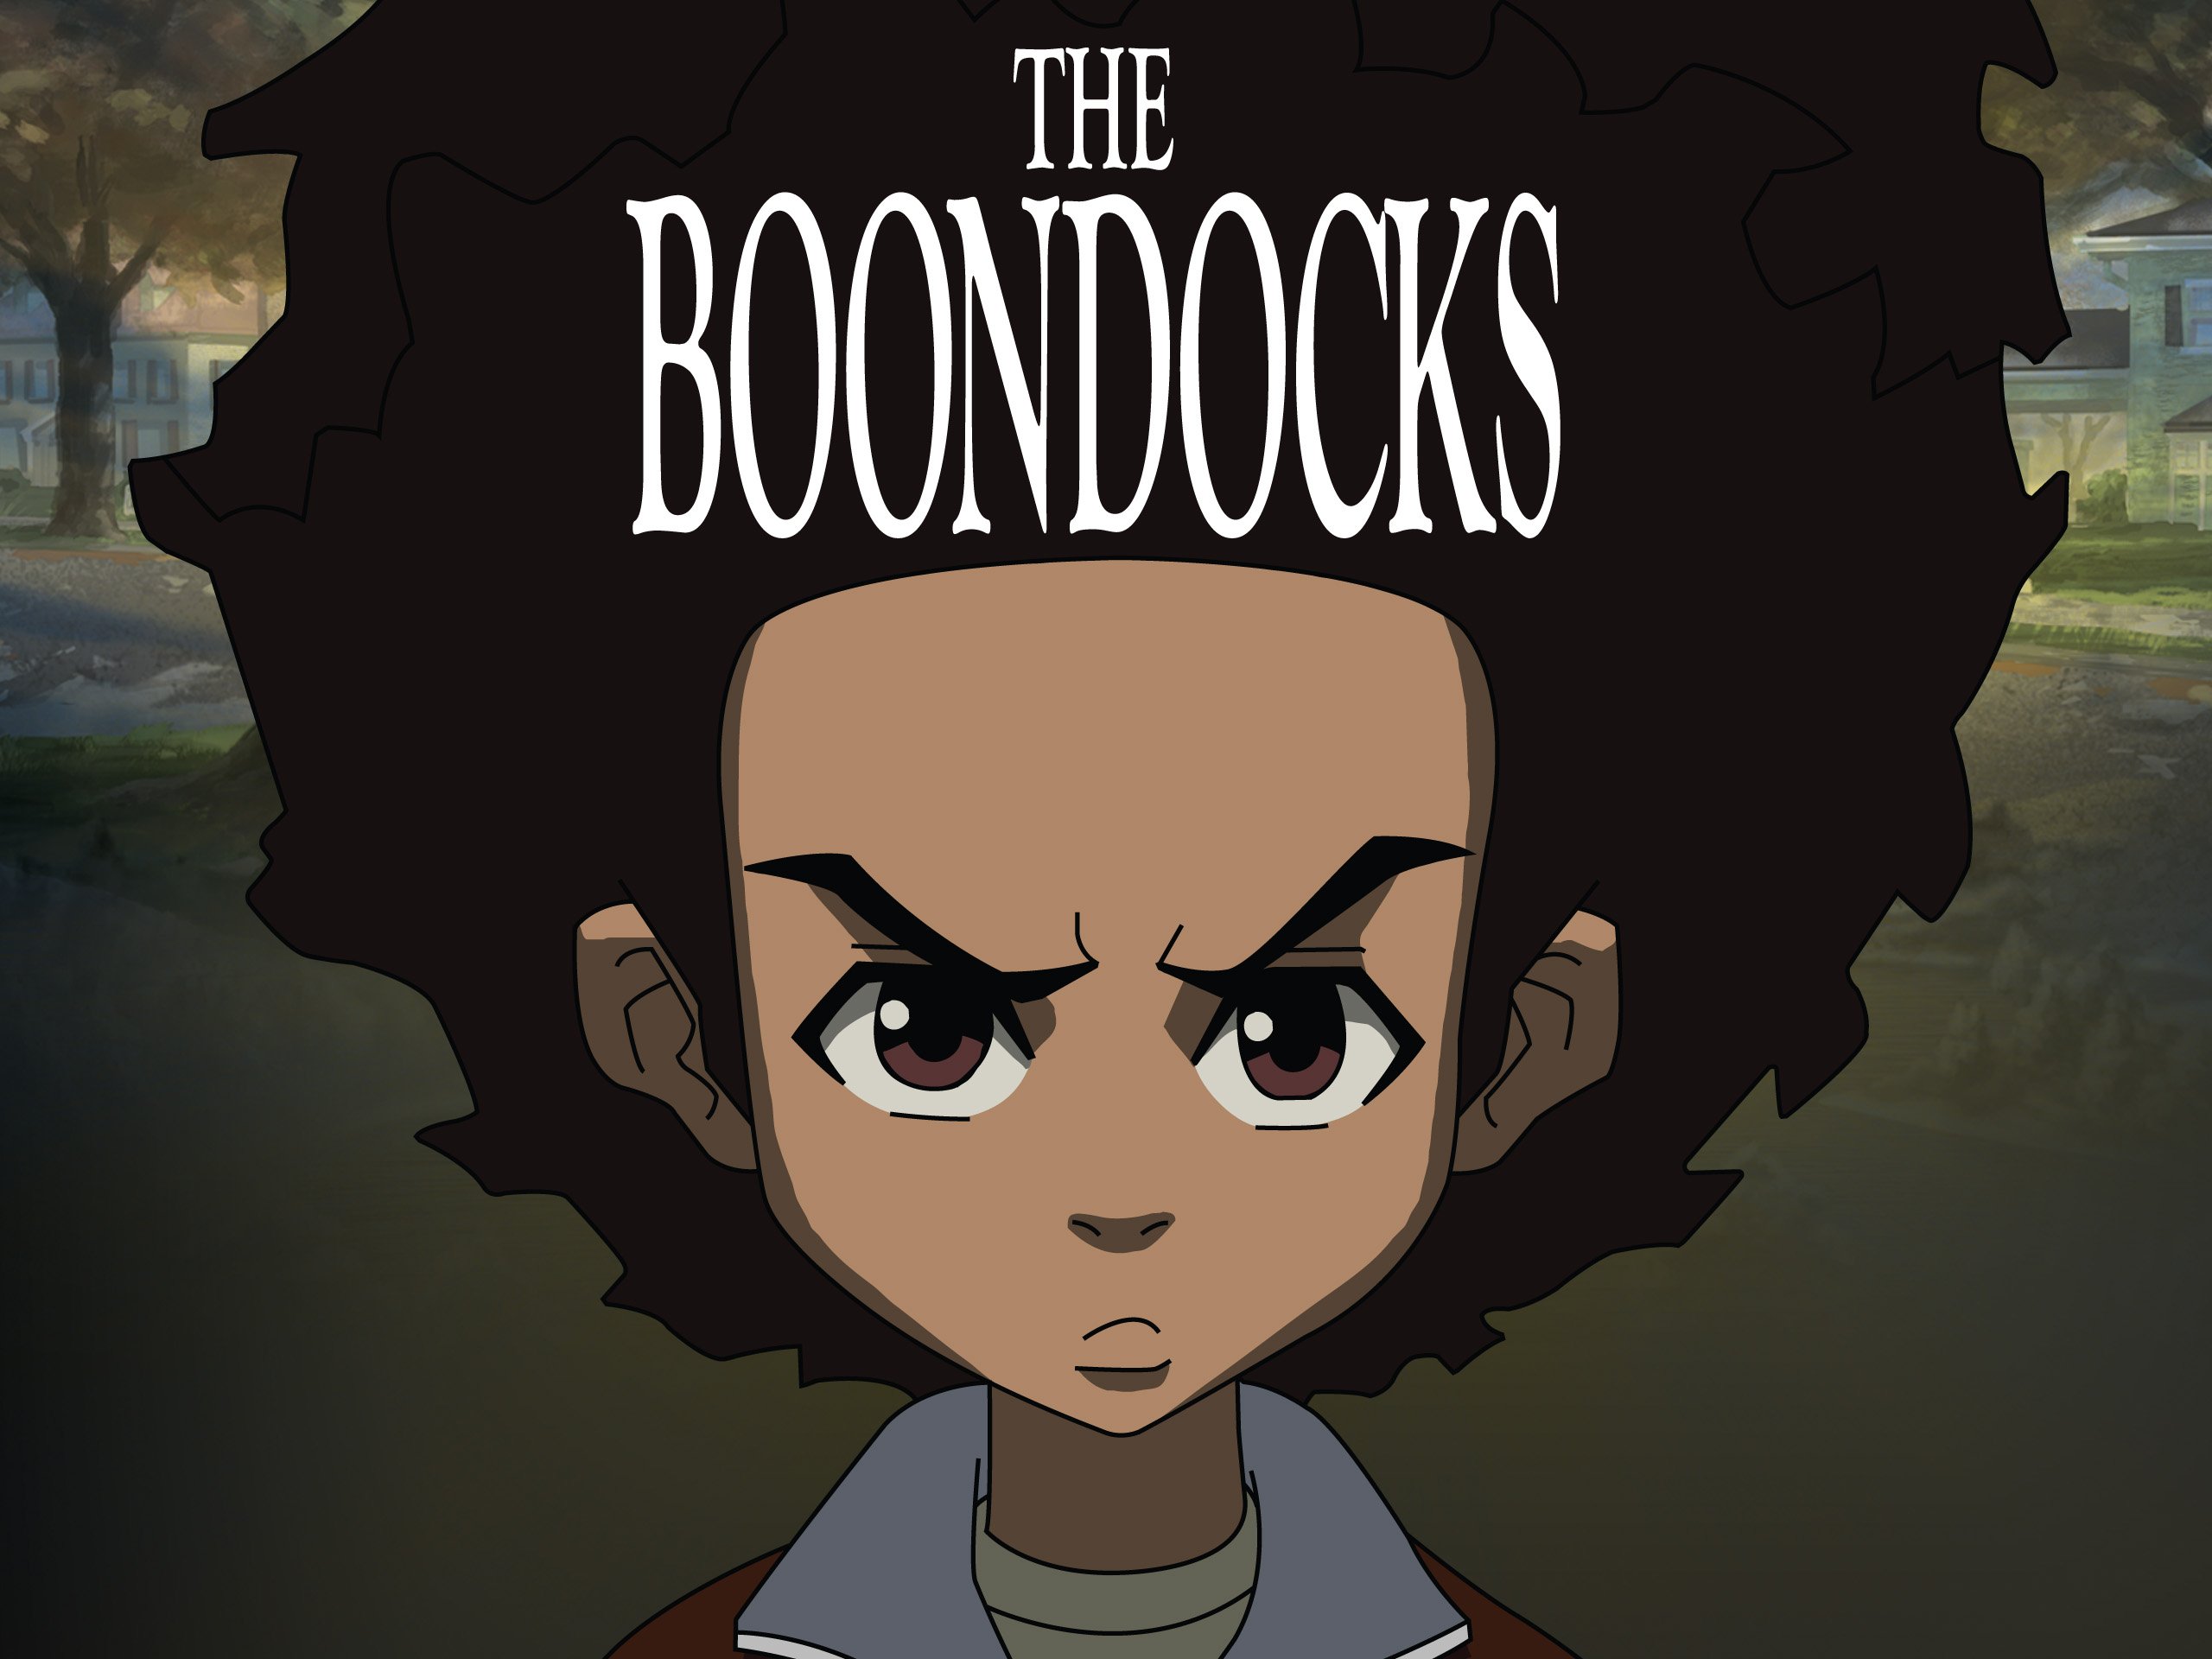 the political and satirical show The Boondocks.  The Boondocks is...